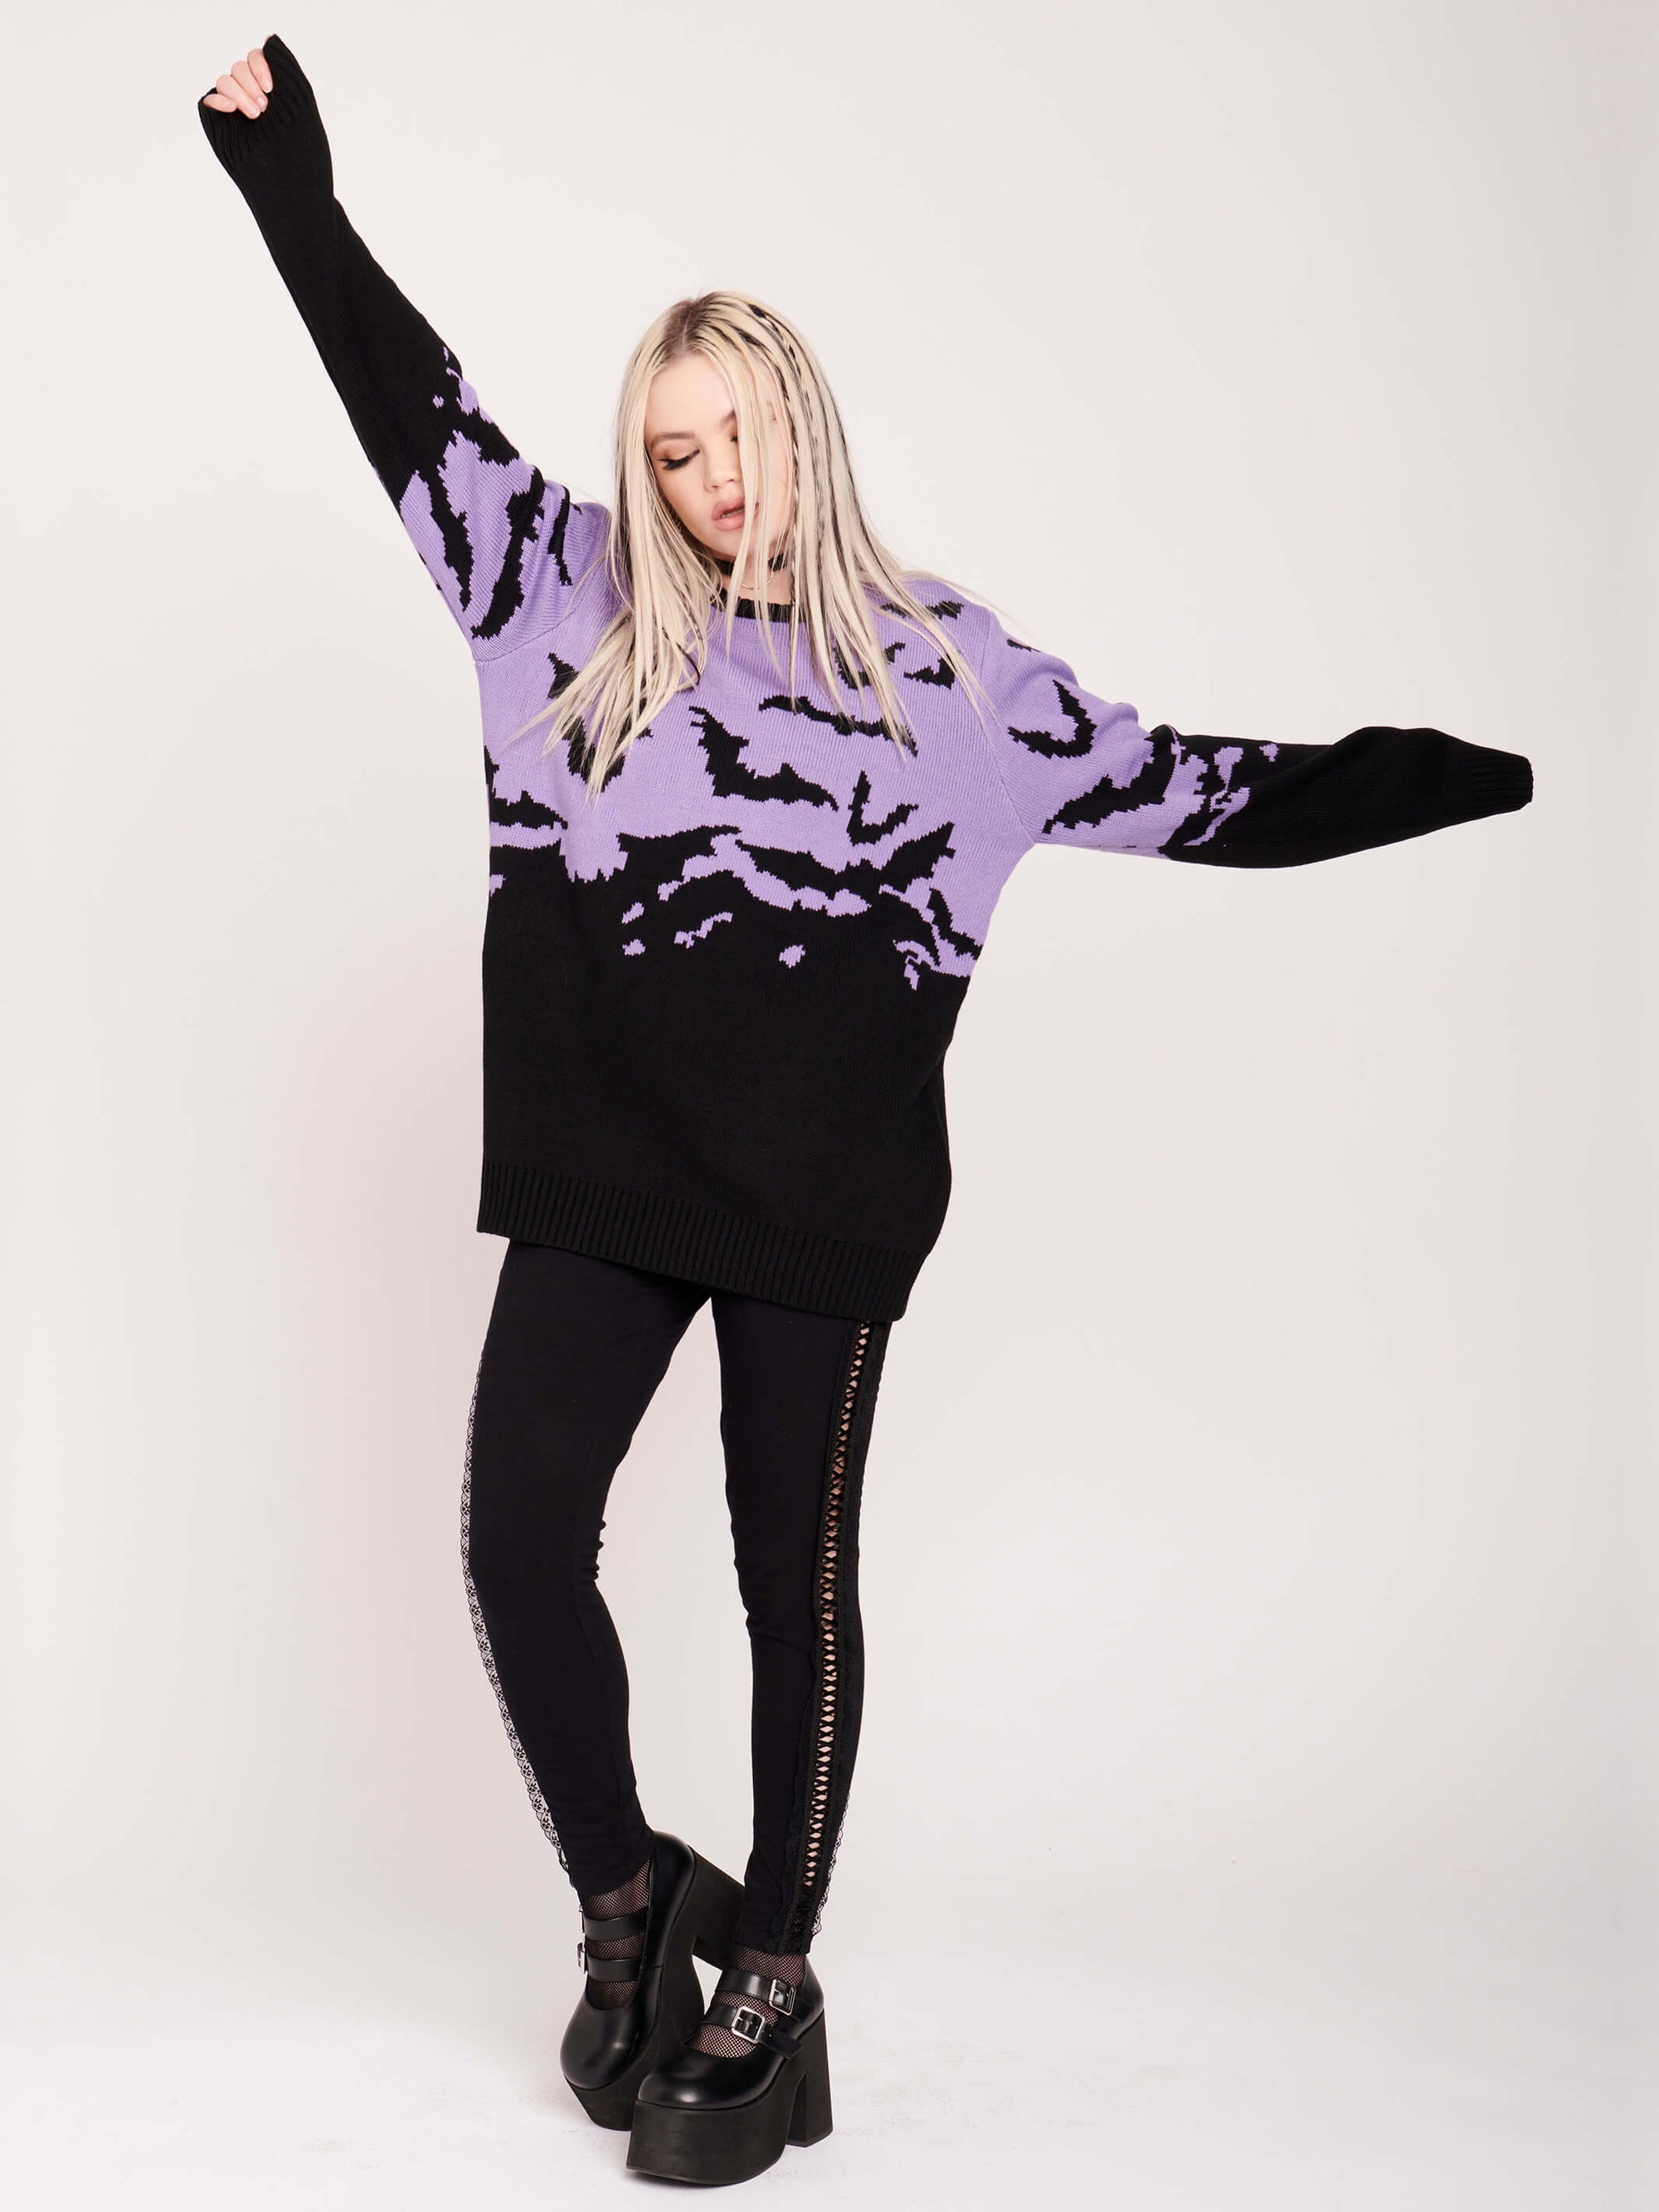 Release the bats in this warm & cozy unisex boyfriend fit intarsia sweater.